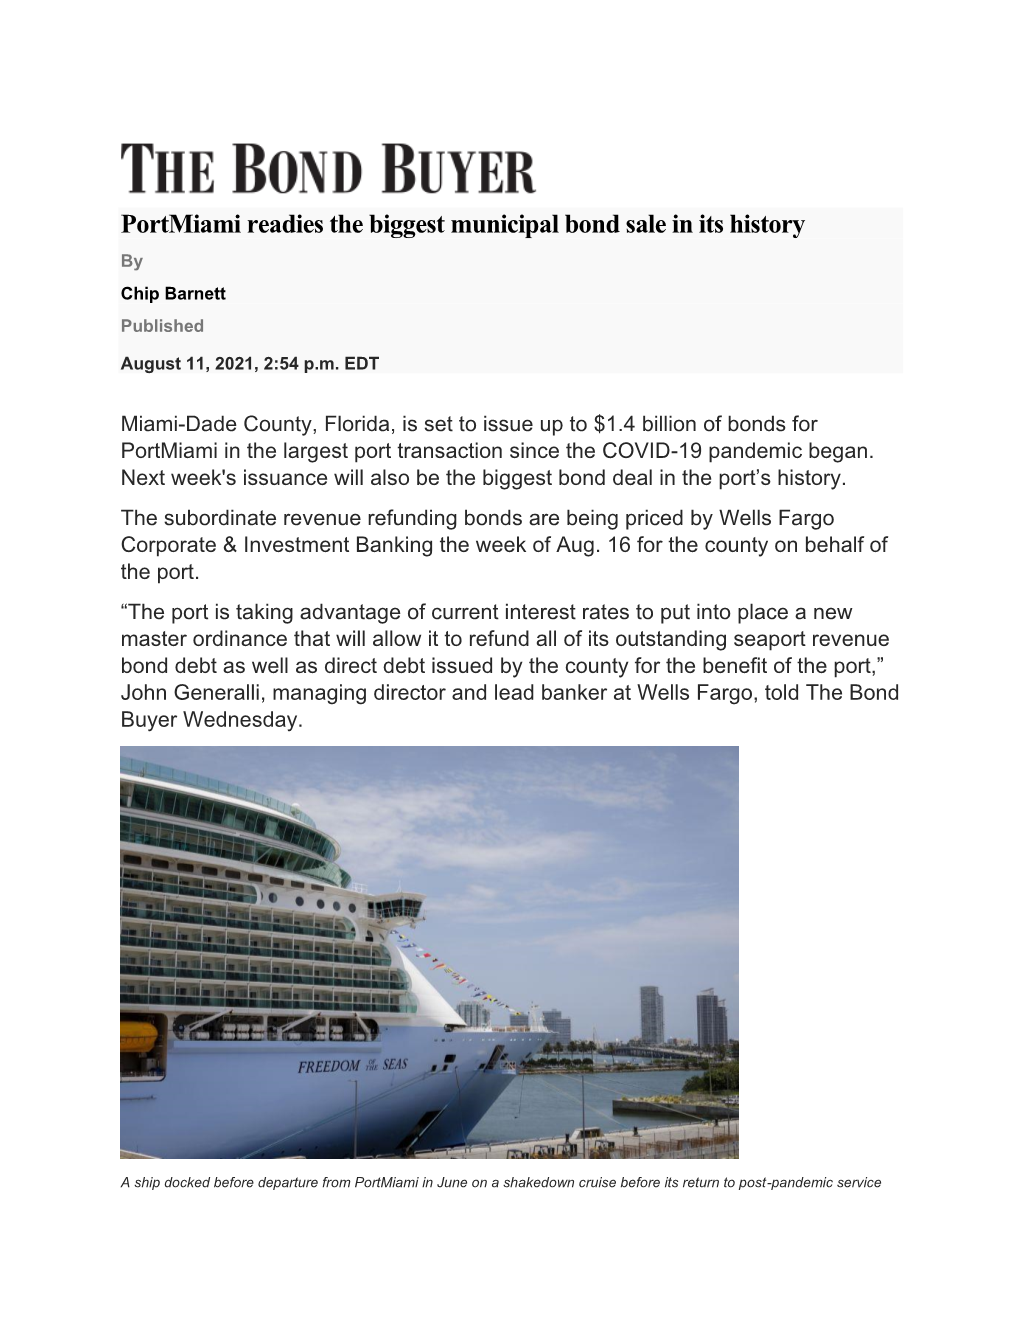 Portmiami Readies the Biggest Municipal Bond Sale in Its History by Chip Barnett Published